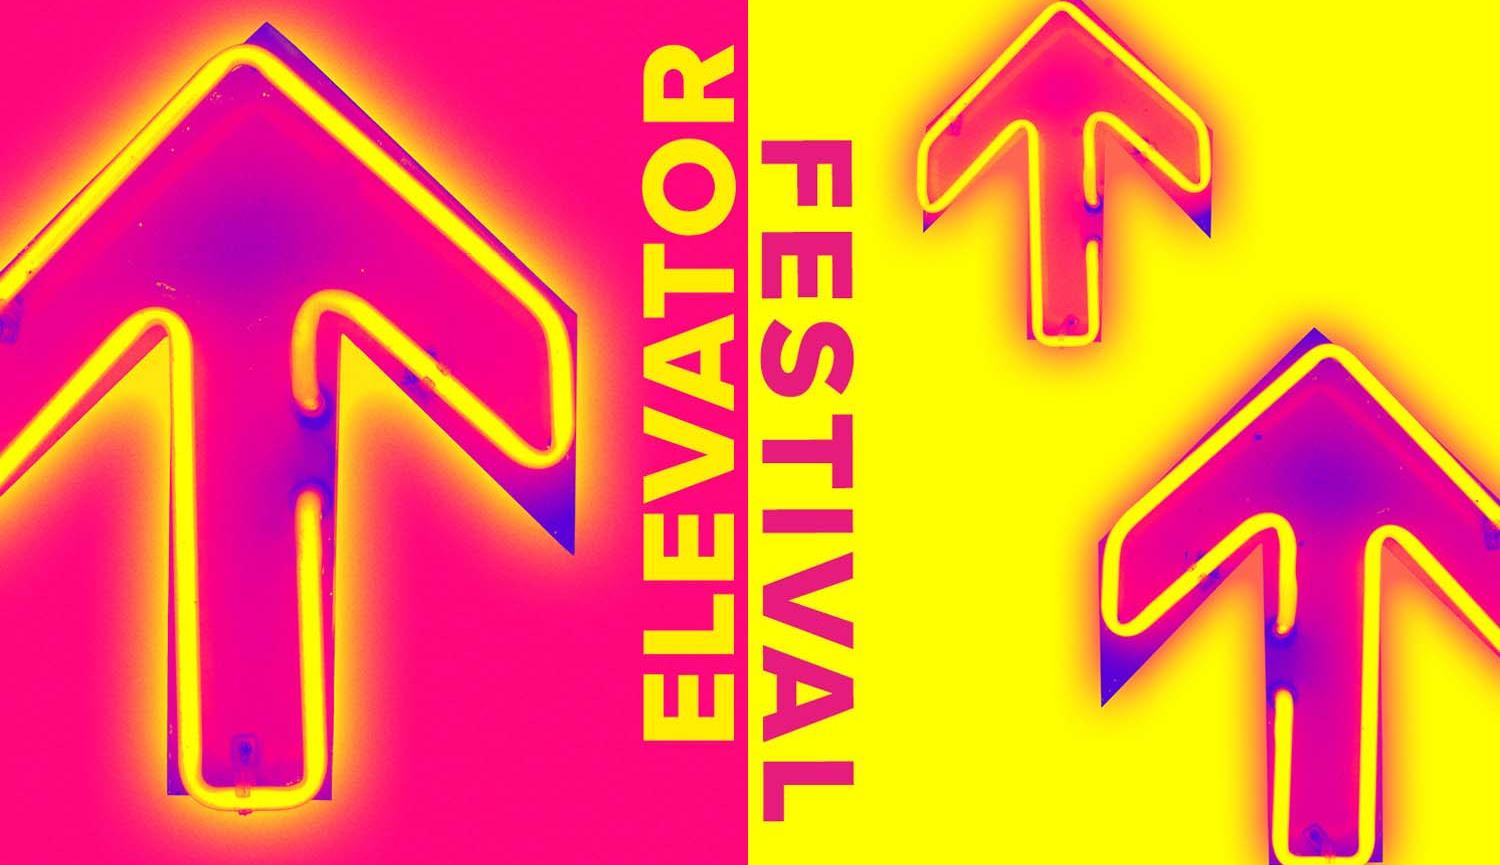 Elevator festival image of yellow neon arrow on pink background on left, 2 pink neon arrows on yellow background on right